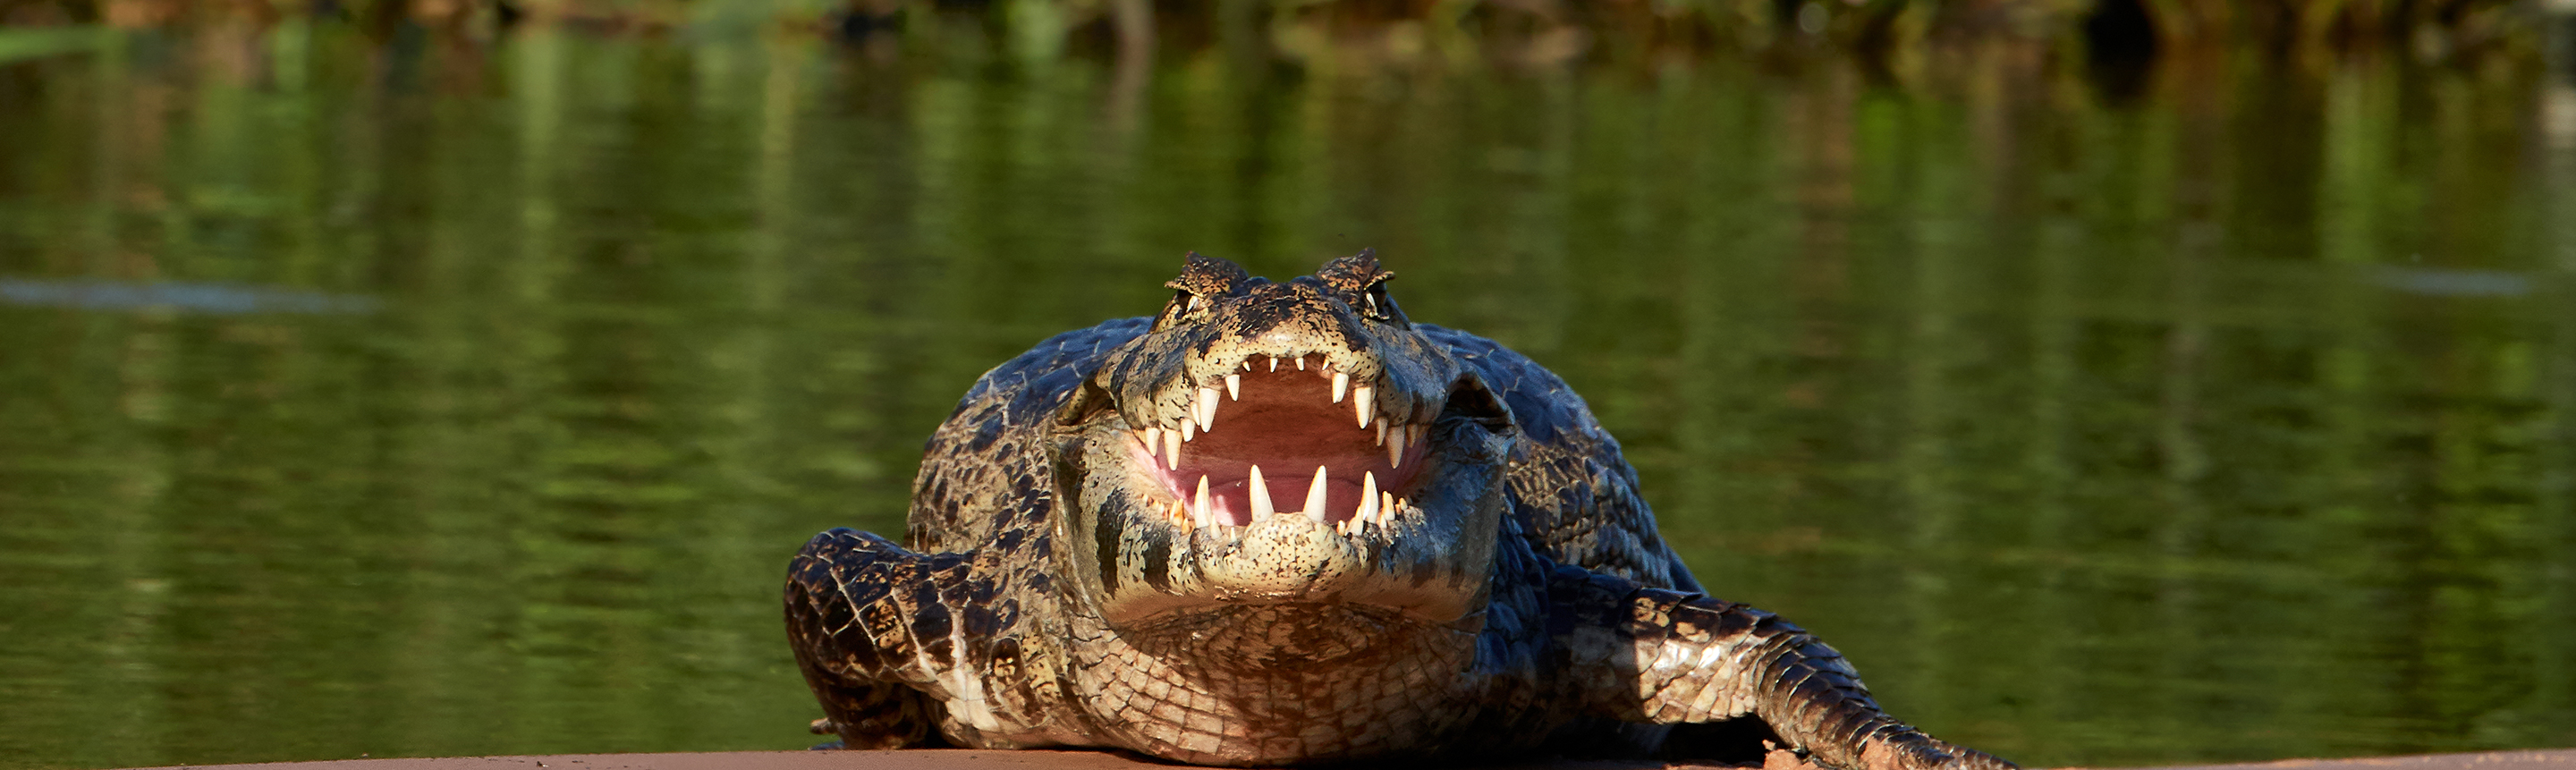 Saltwater crocodile guide: diet and where they live in the wild - Discover  Wildlife